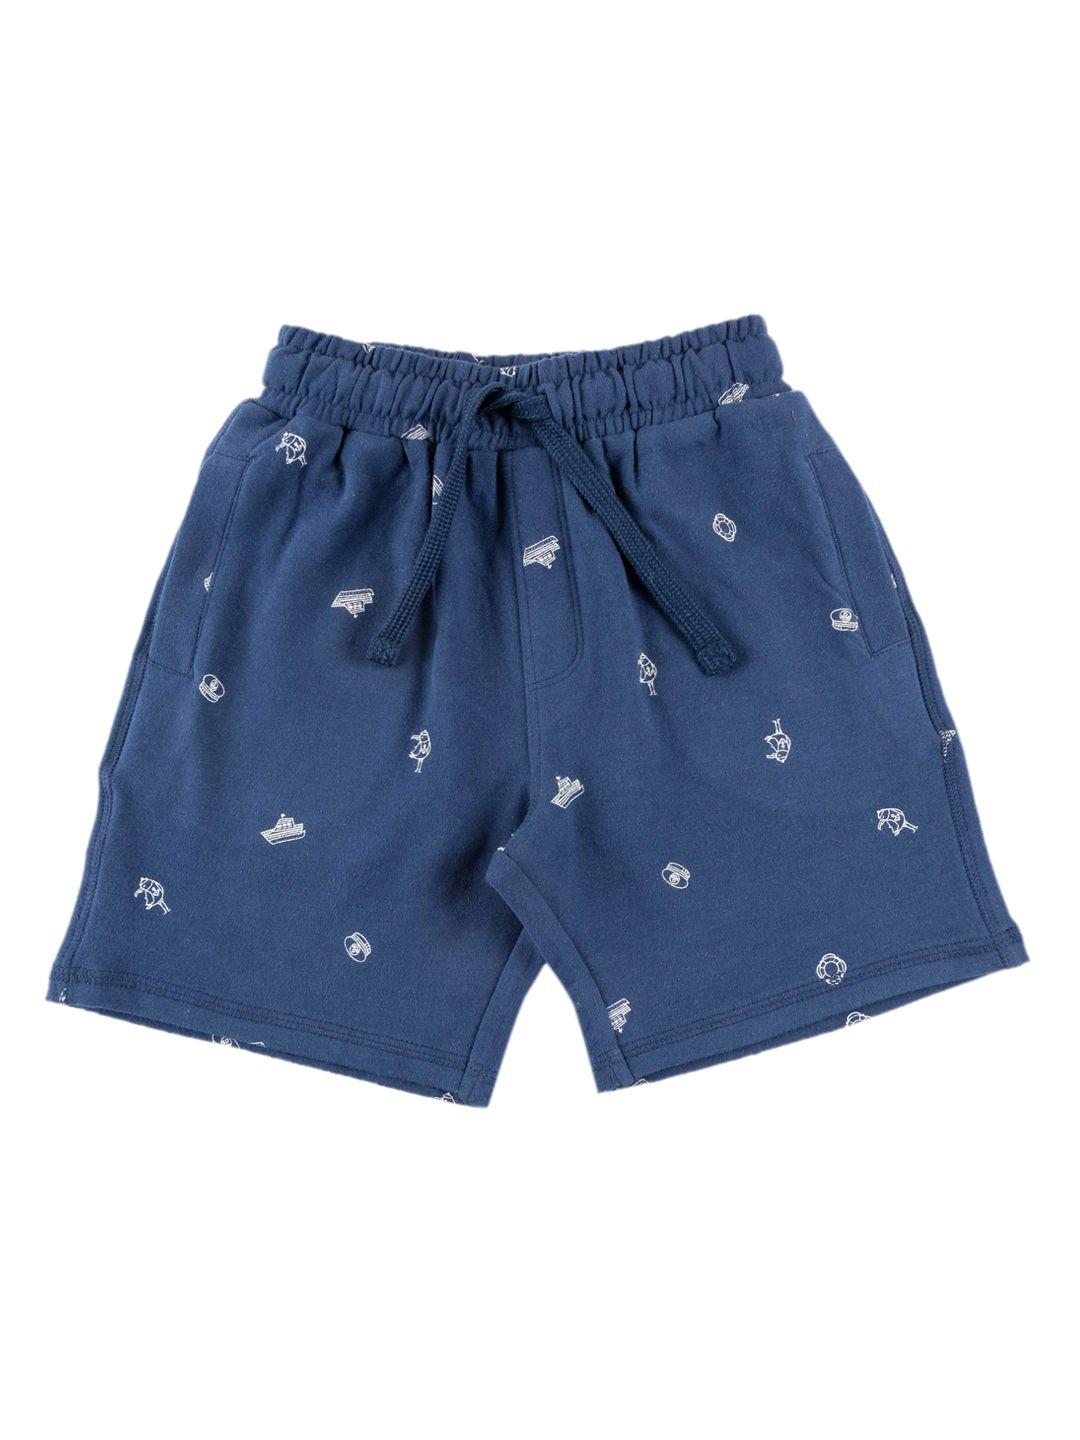 juscubs boys navy blue conversational printed pure cotton high-rise shorts